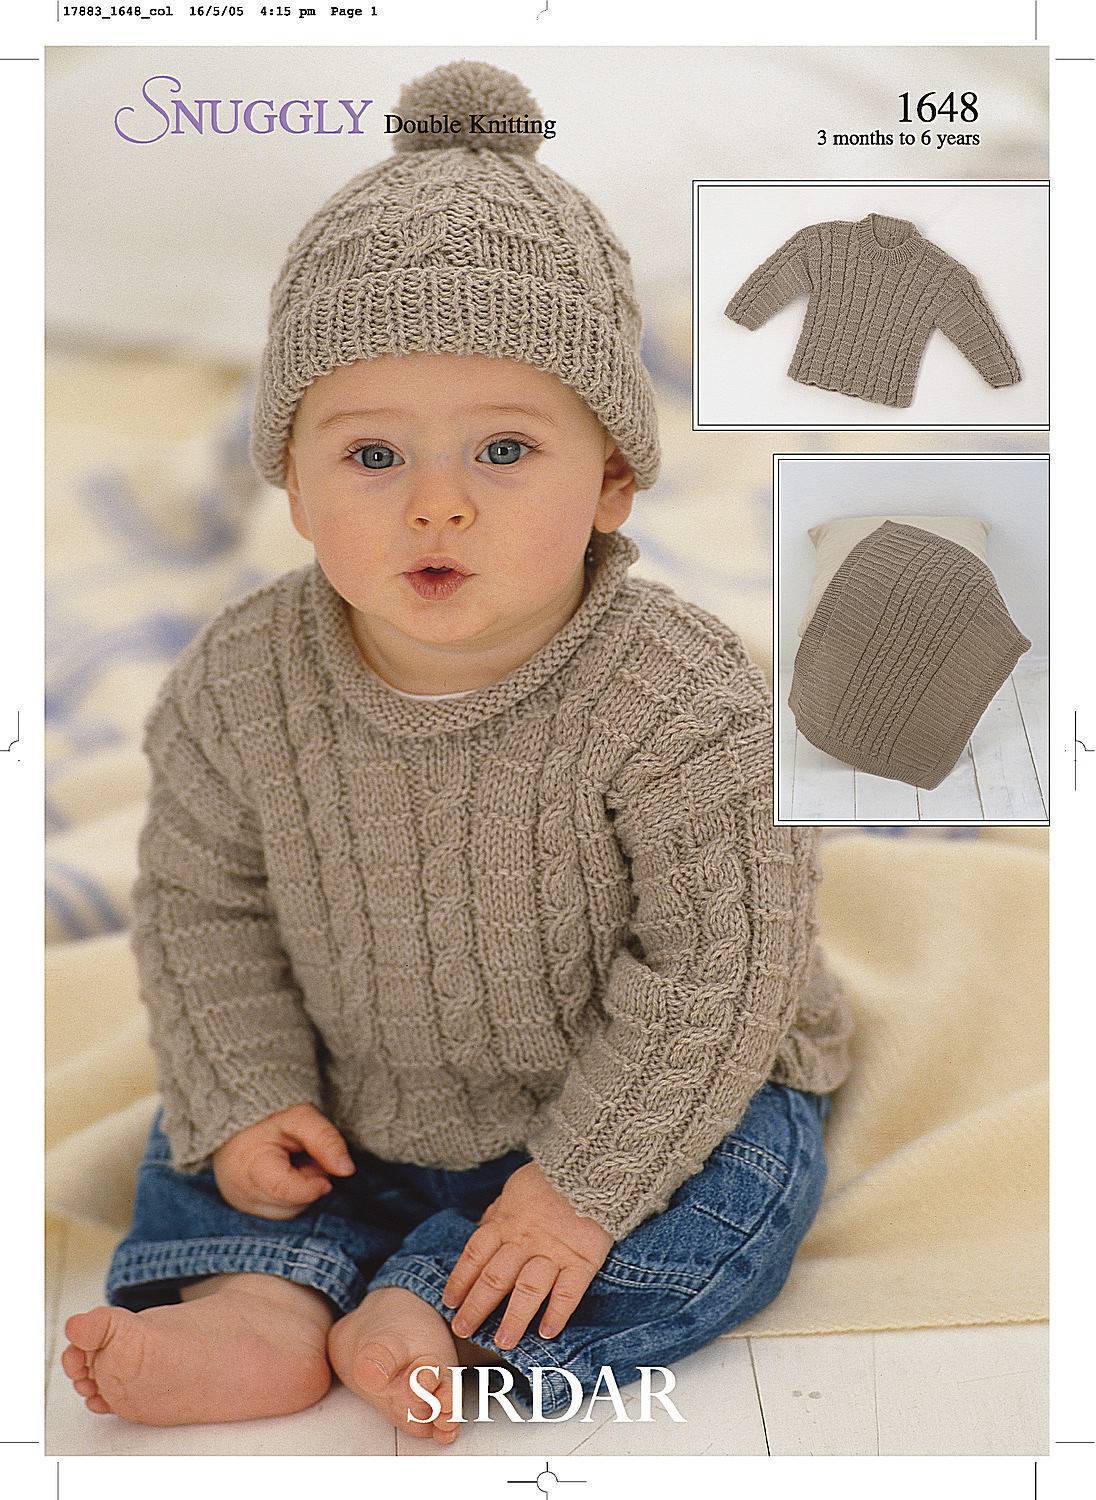 Sweaters, Blanket and Hat in Sirdar Snuggly DK (1648) | The Knitting ...